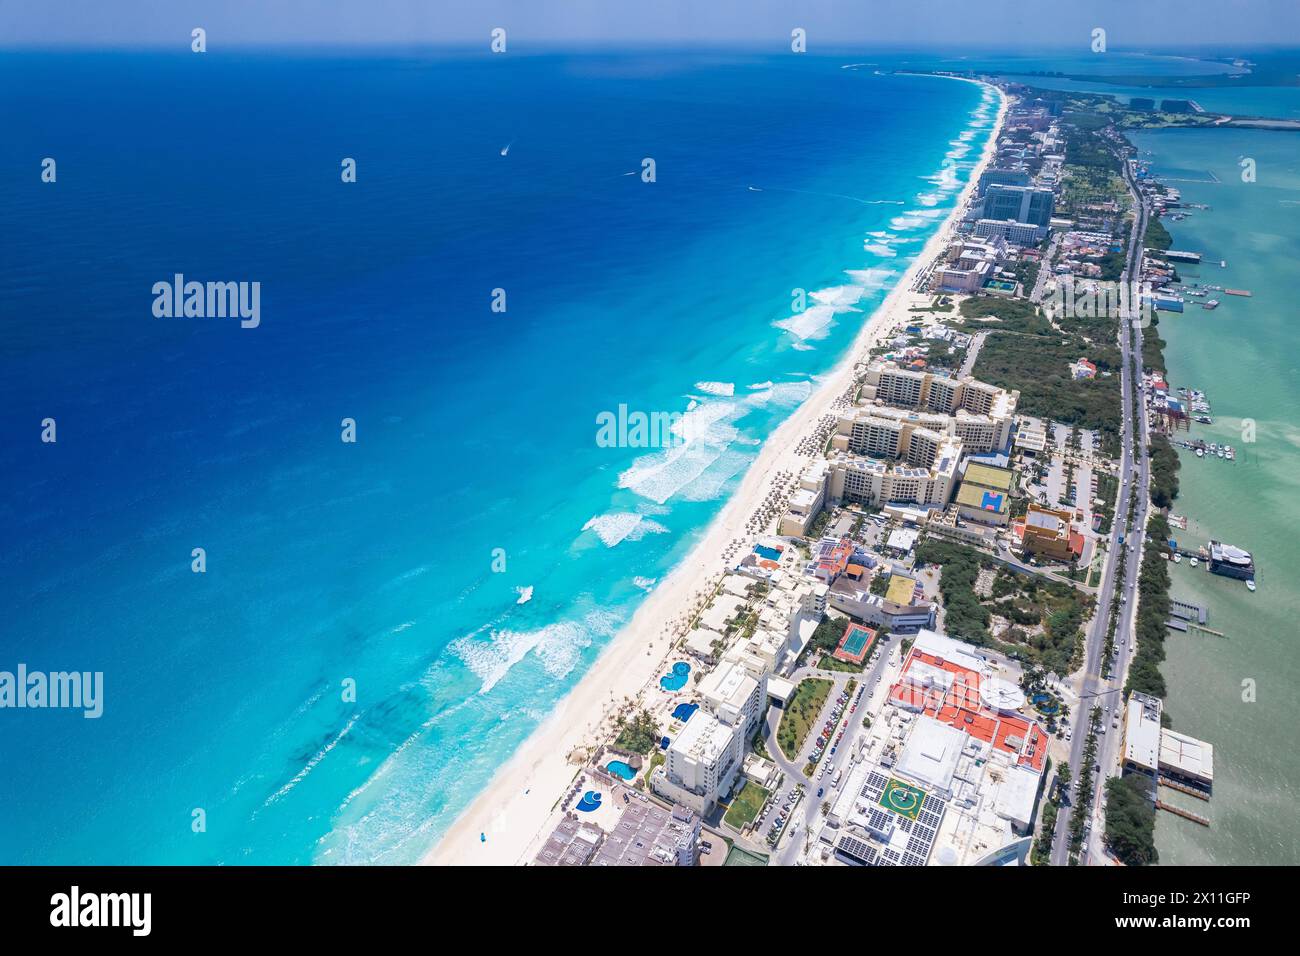 Drone view of Cancun Hotel Zone, Mexico Stock Photo